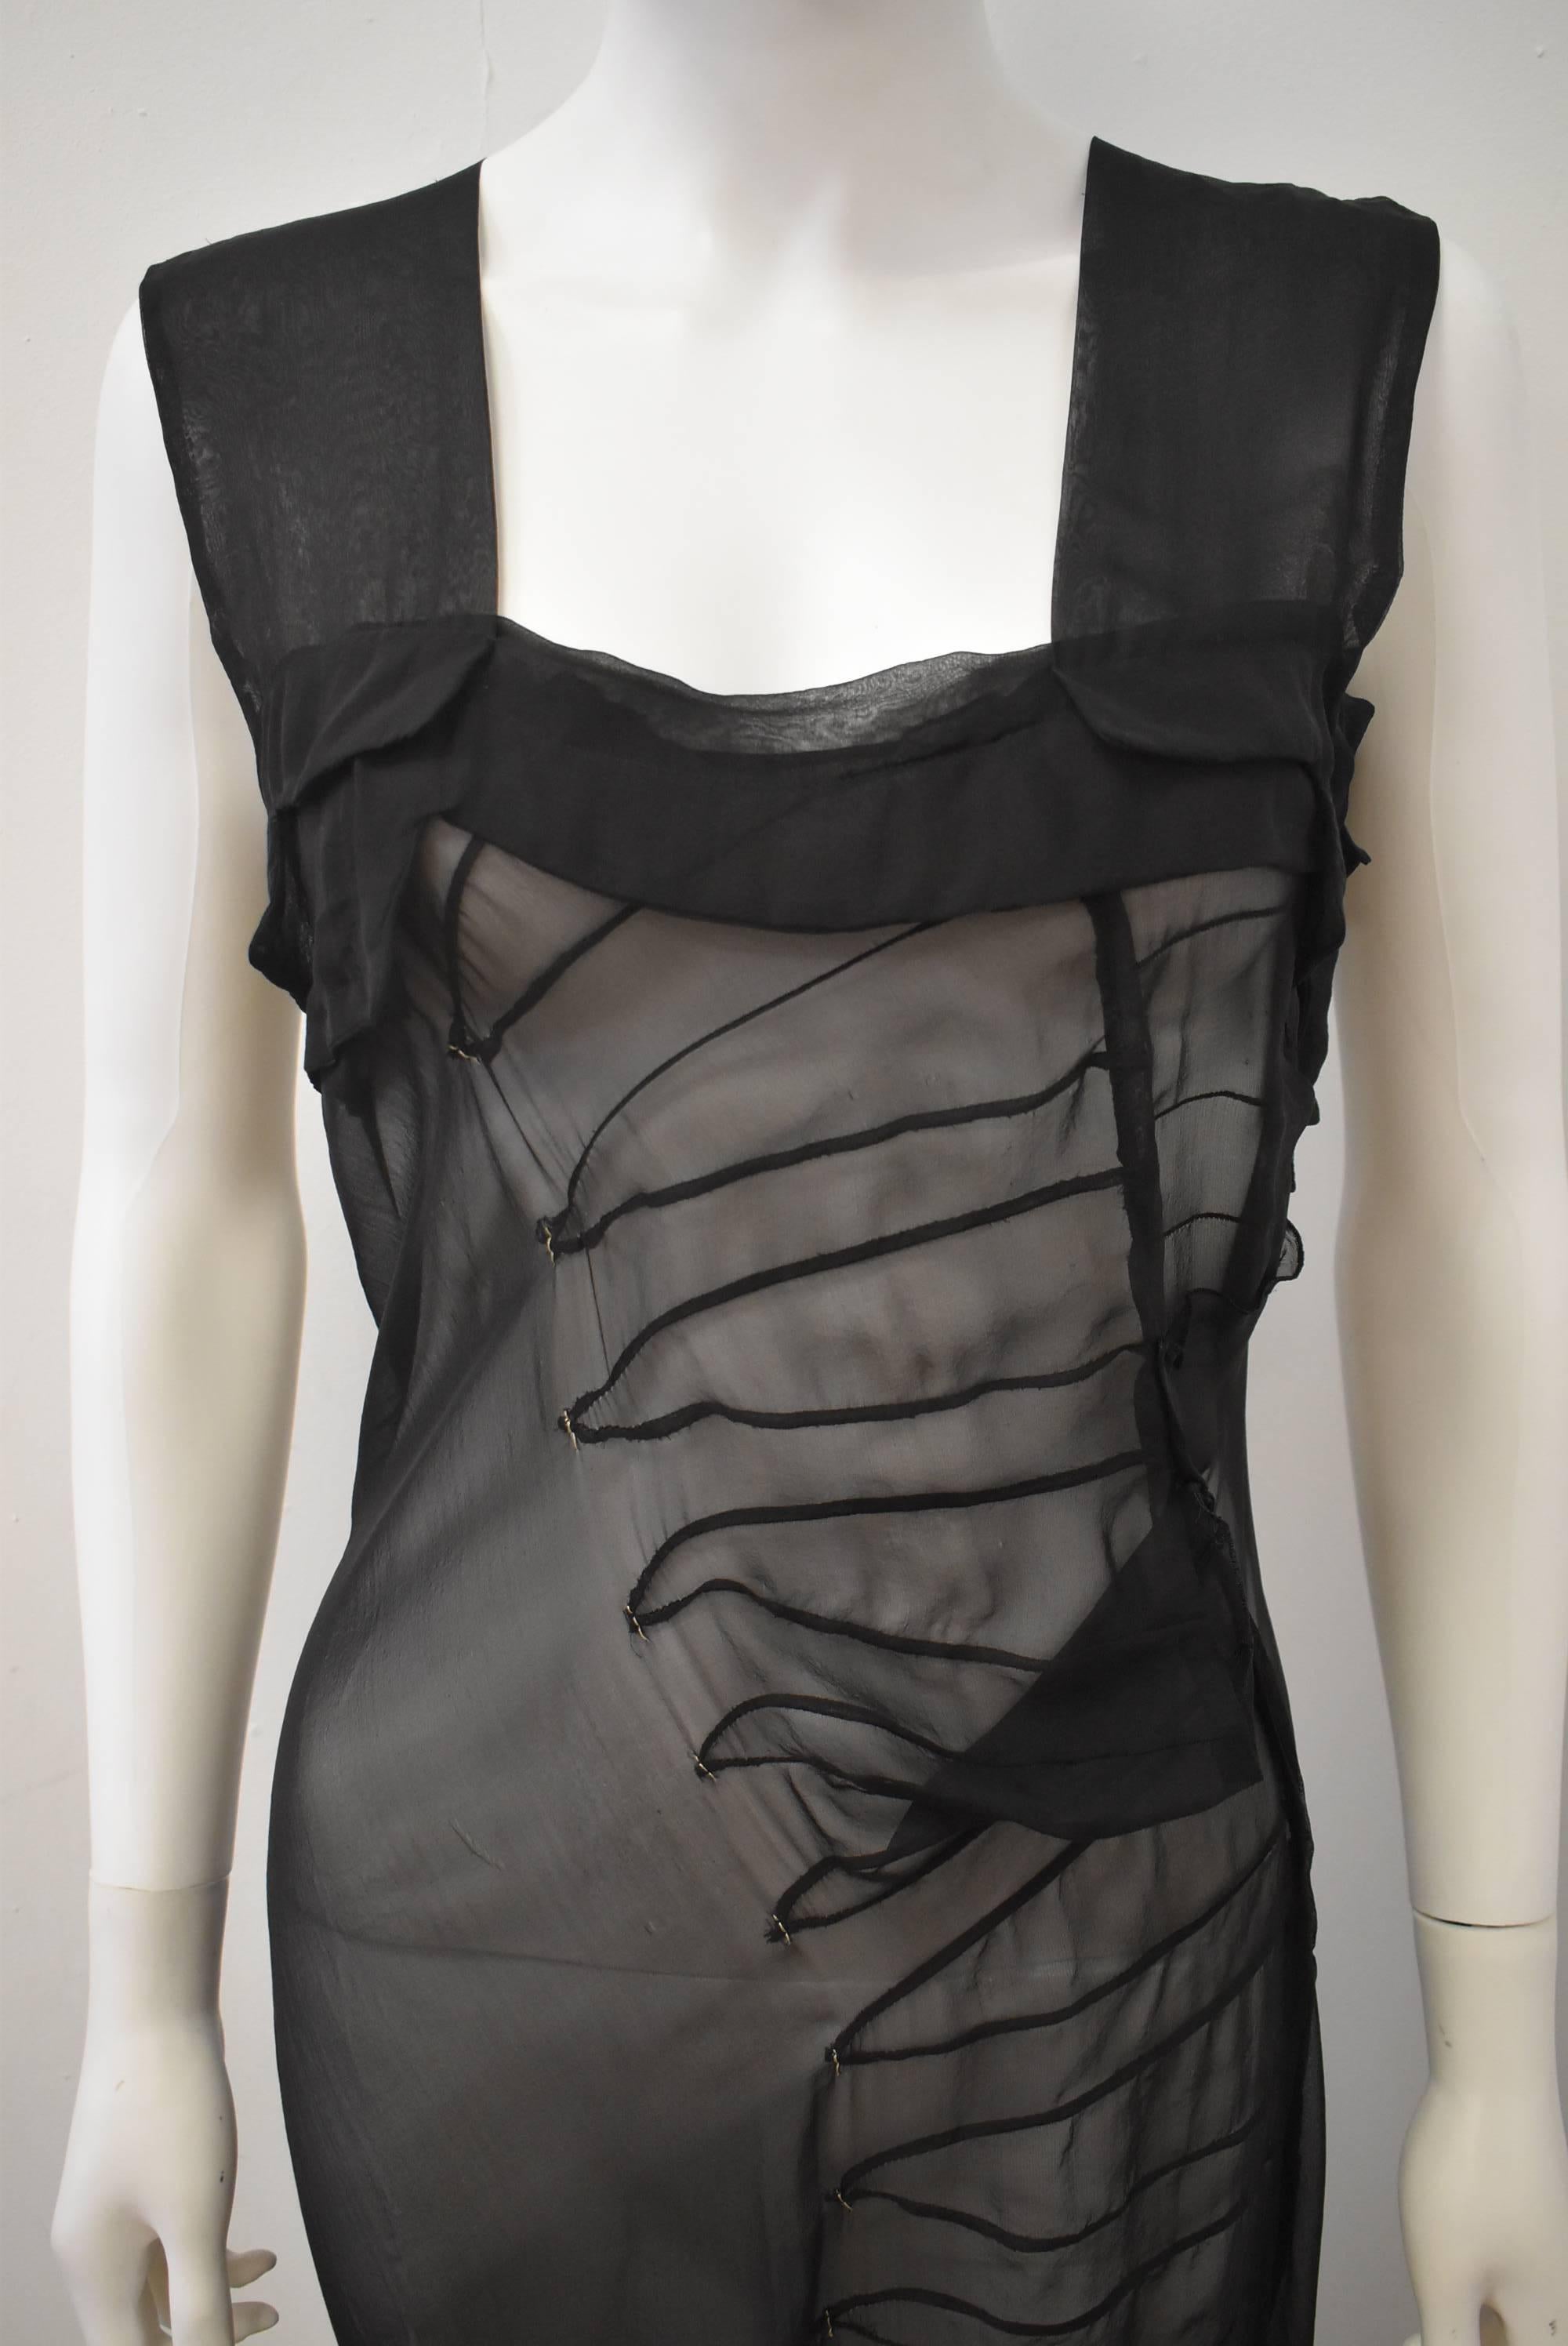 A black sheer maxi dress by Jil Sander. The dress features a repetition of seams that resemble articulated armour panels. The inserts are finished with tiny hand sewn silver stitches at each point. The dress also features a train at the back and a